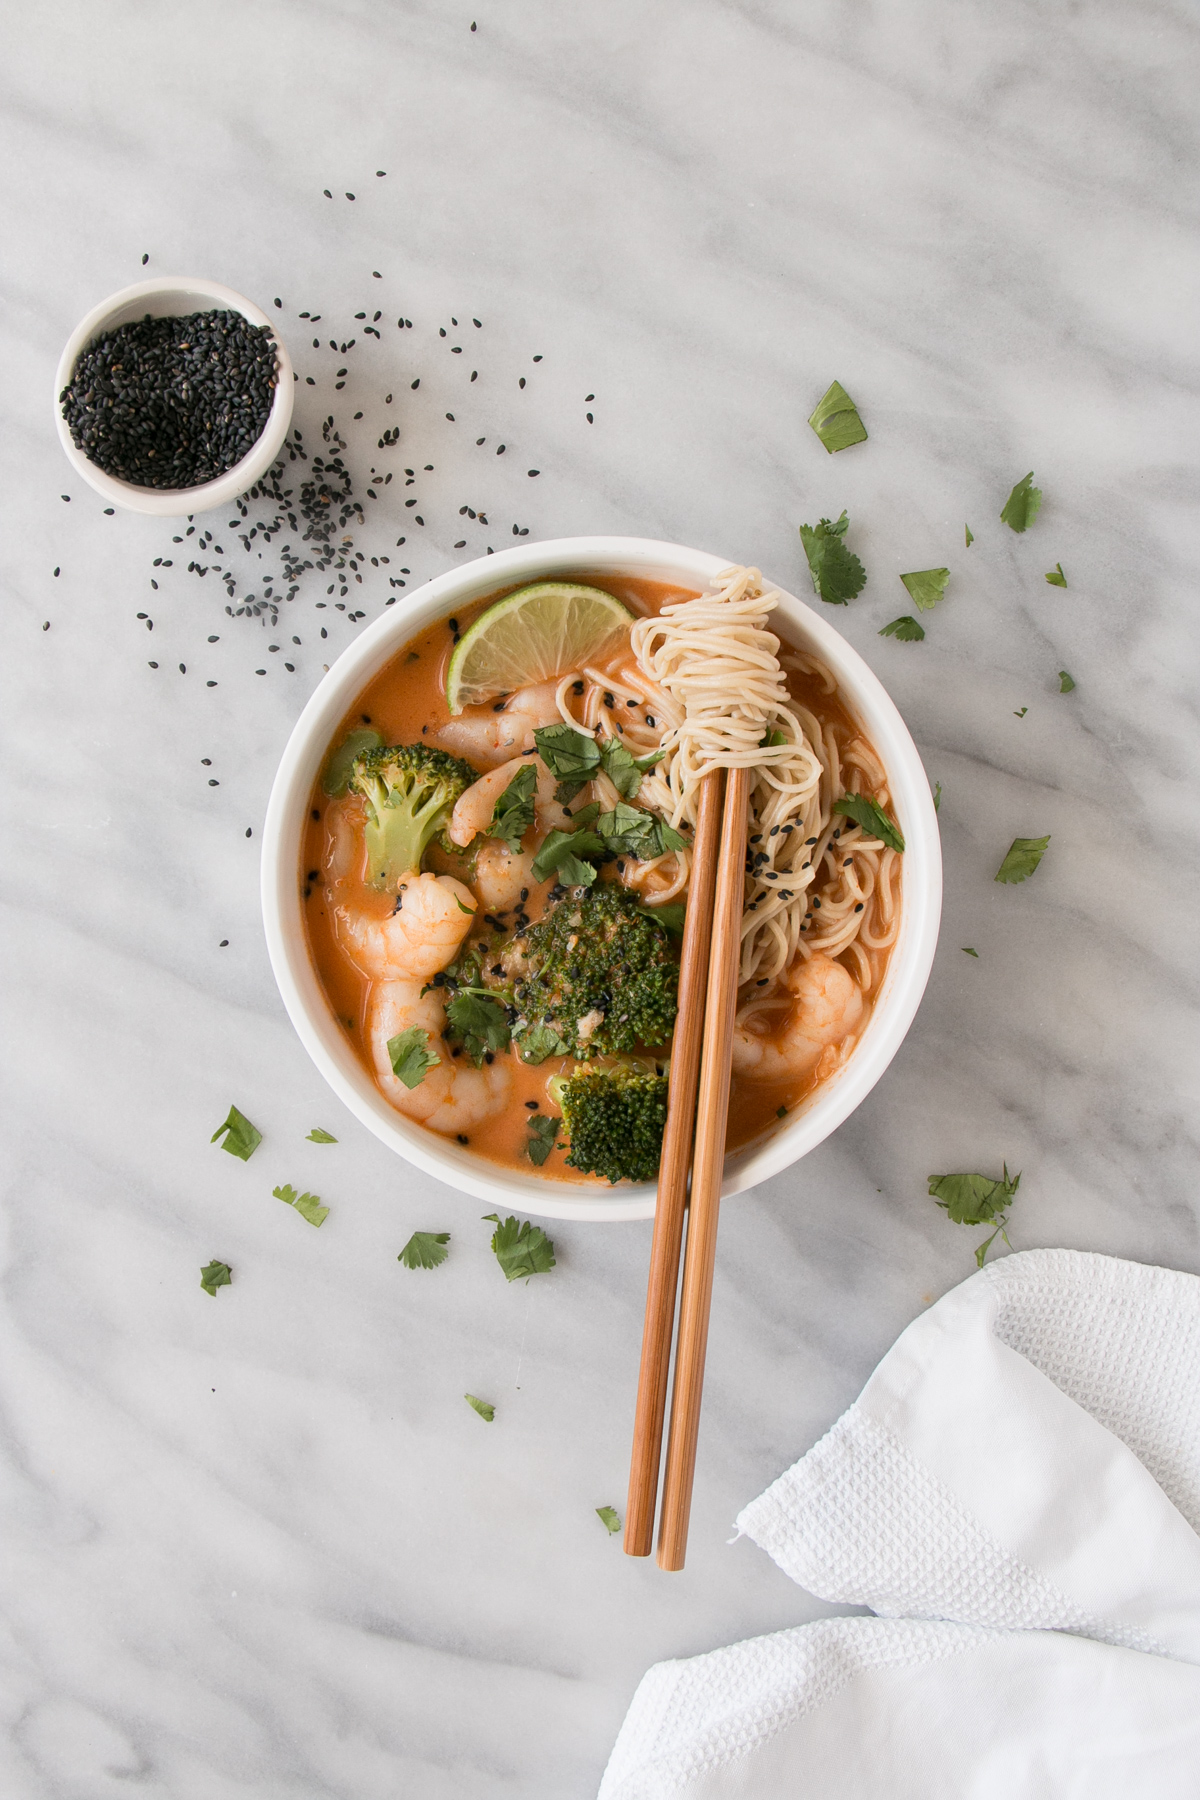 Prawn and Broccoli Red Curry in a white bowl